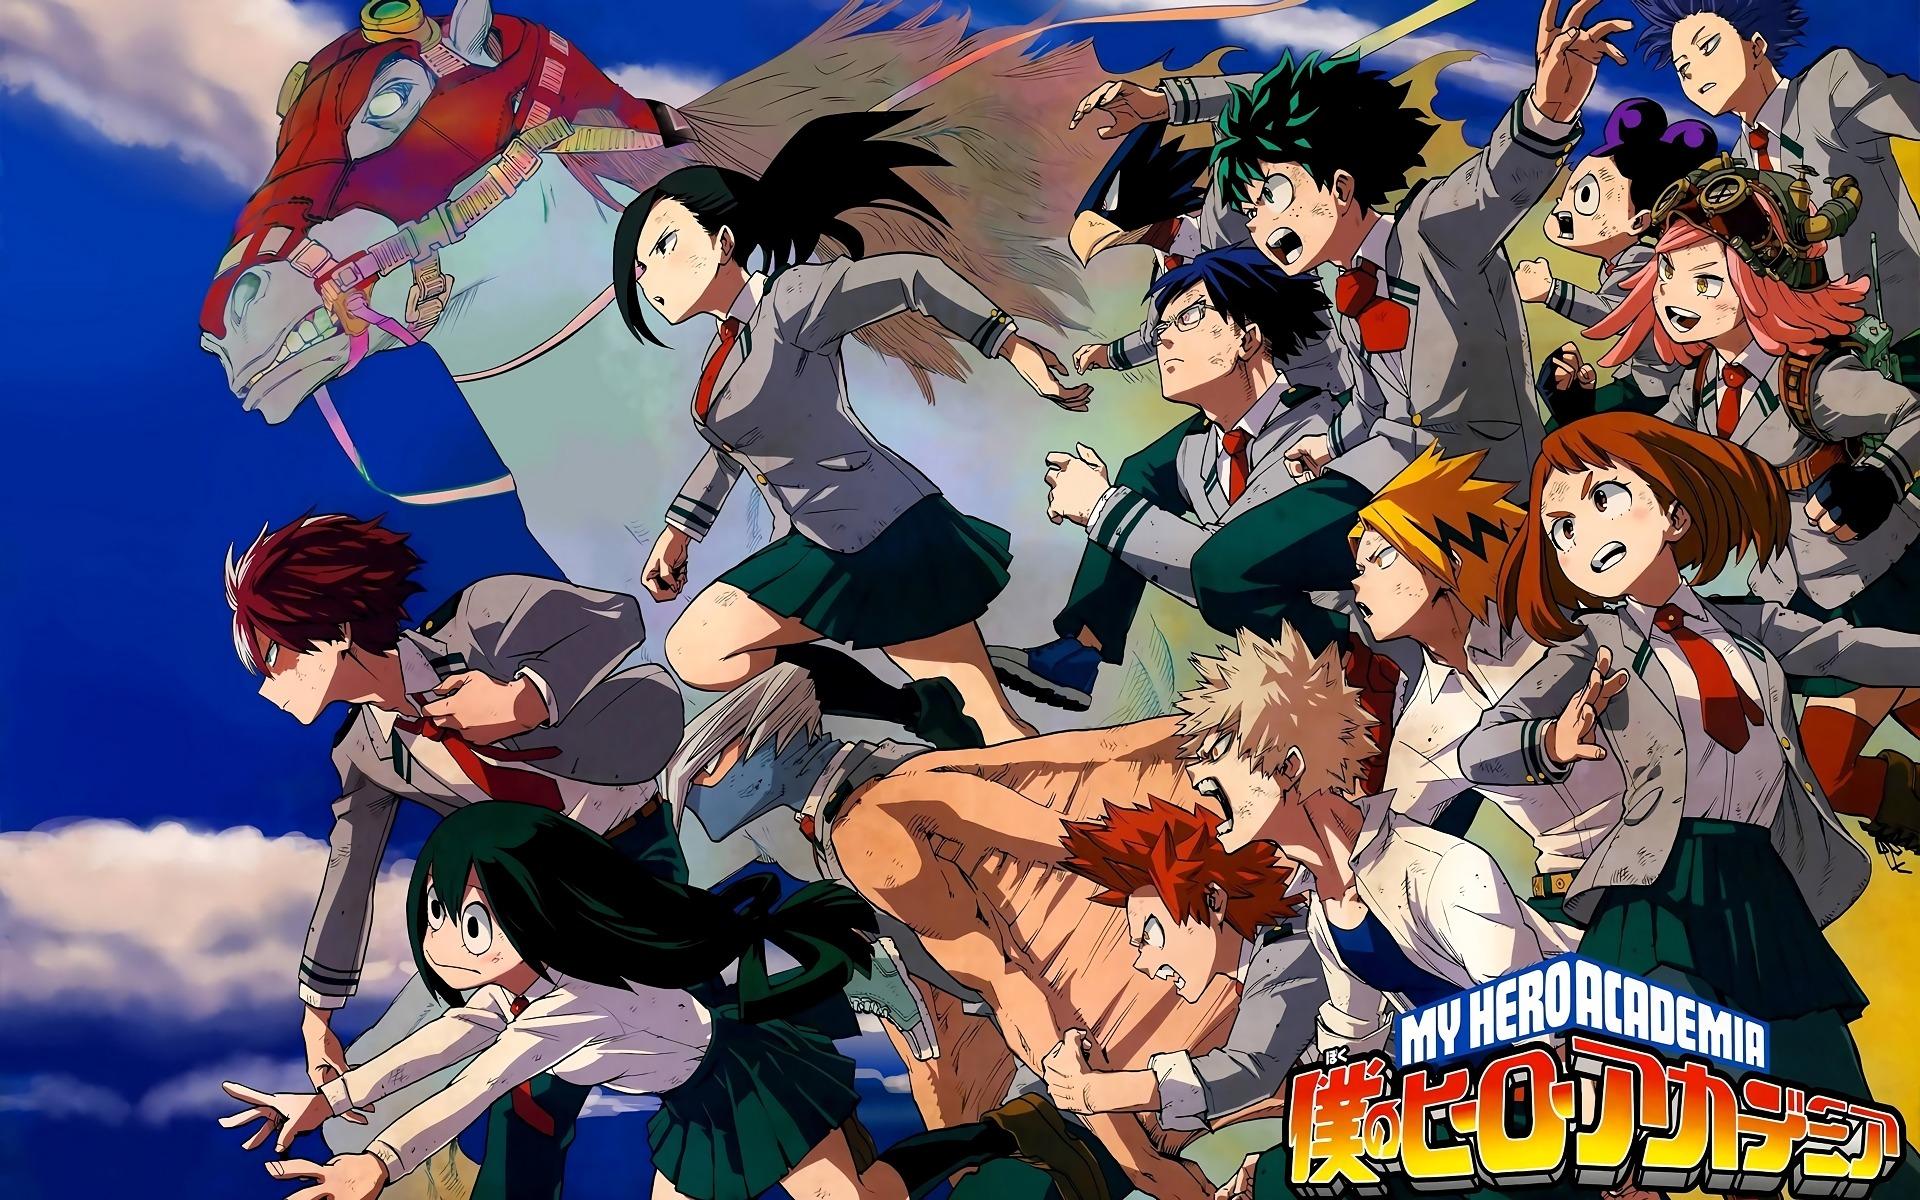 Download wallpaper from anime My Hero Academia with tags